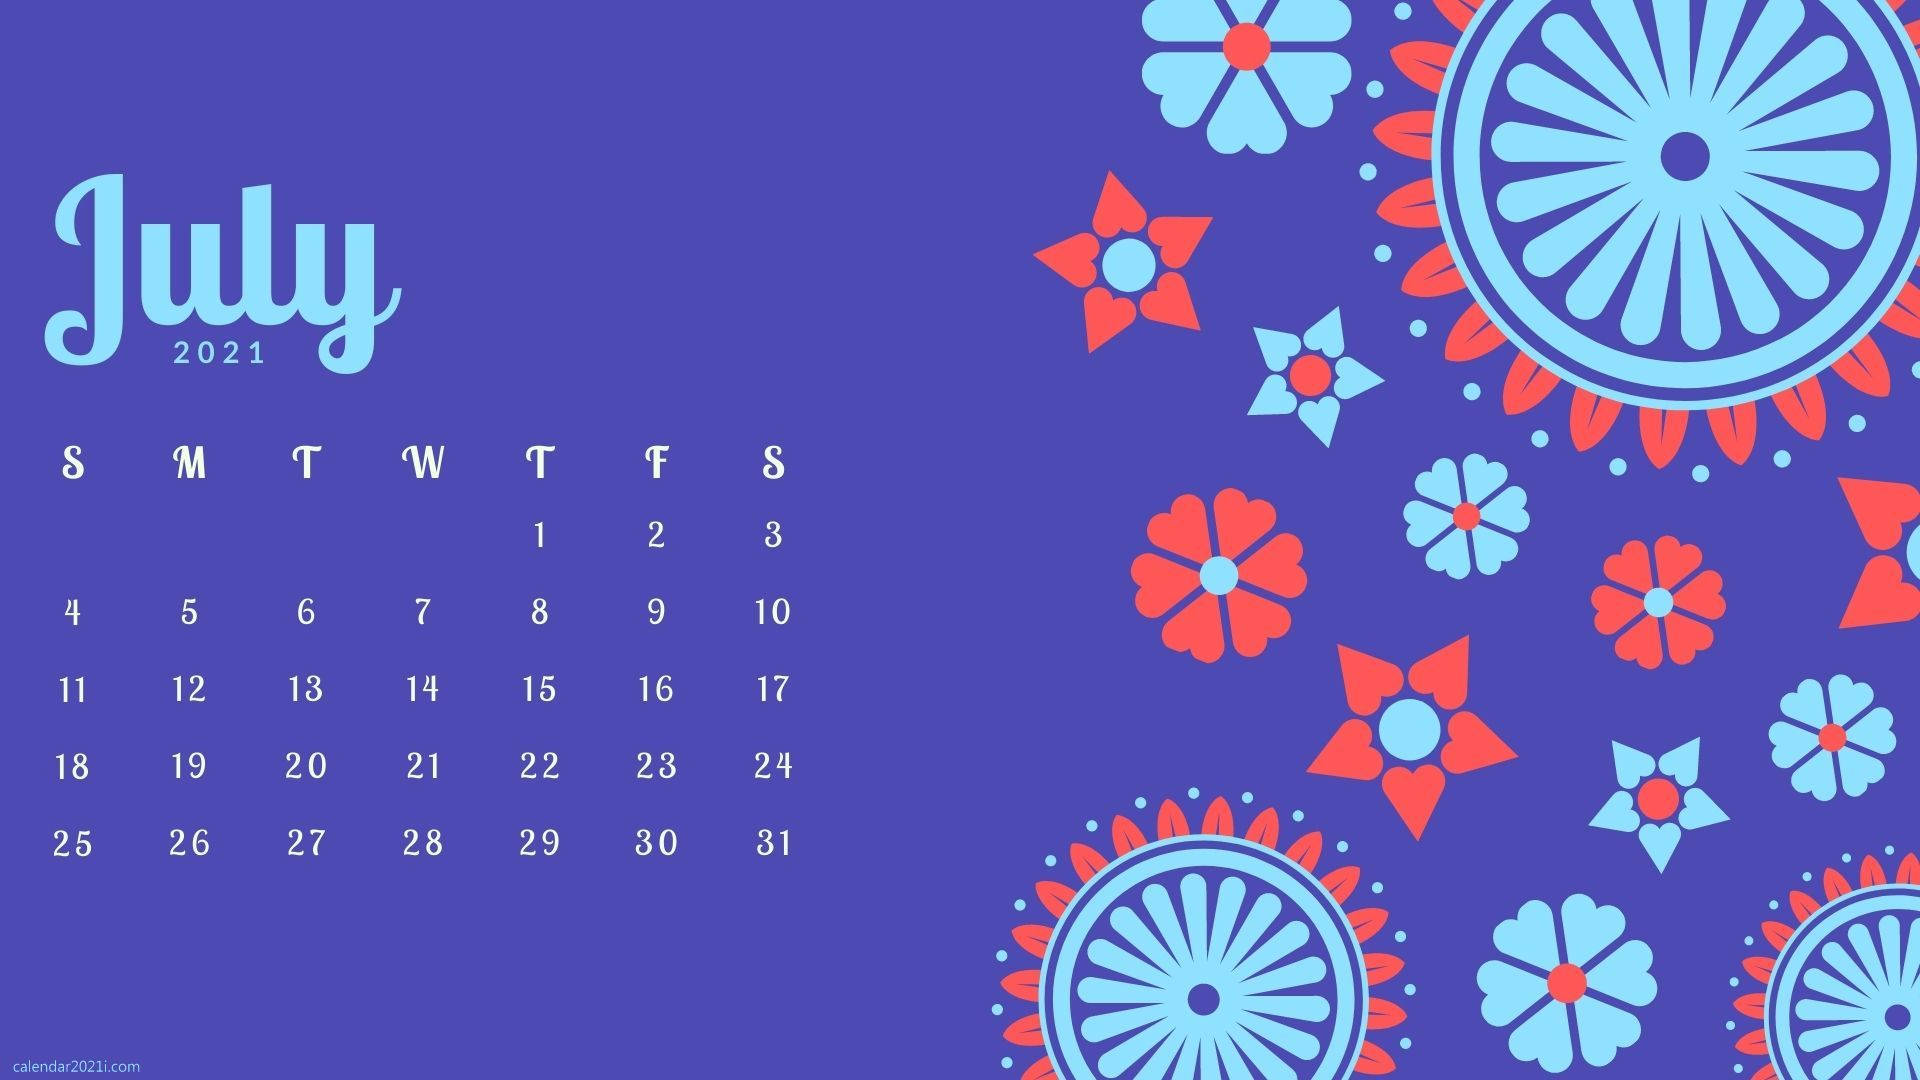 Start the Month of July with a Colorful Calendar Wallpaper